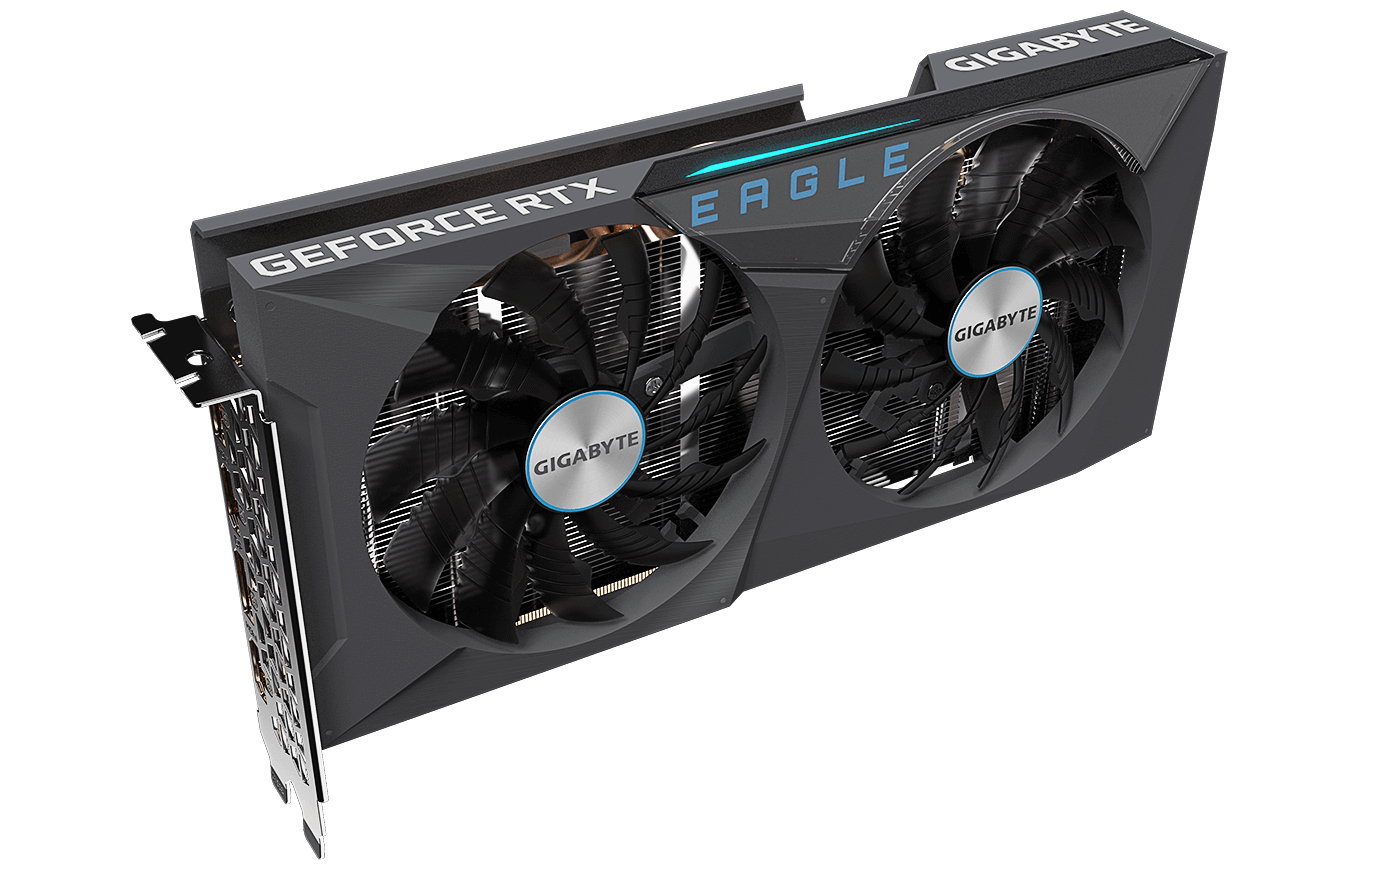 GeForce RTX™ 3060 Ti EAGLE Card 2.0) Key 8G Global GIGABYTE Graphics (rev. | - Features OC